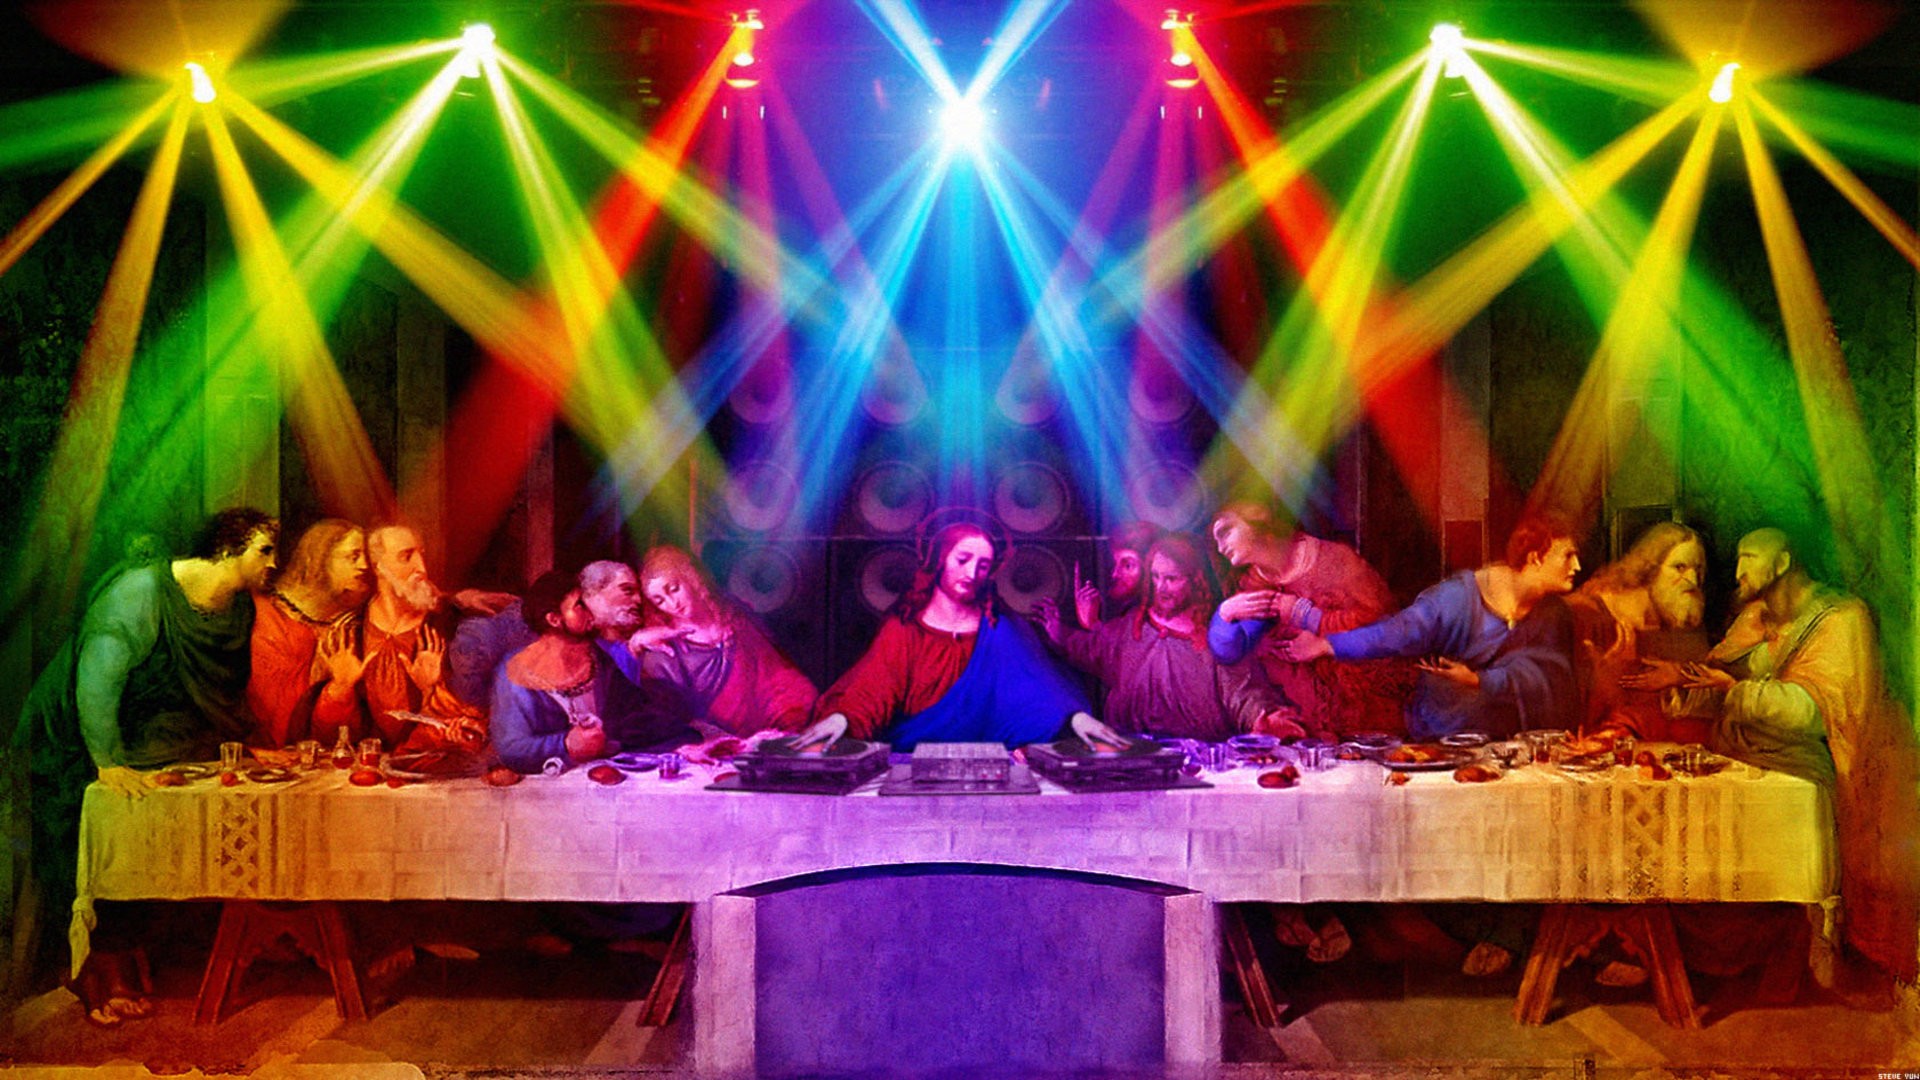 Anime Nightclubs The Last Supper Colorful 1920x1080